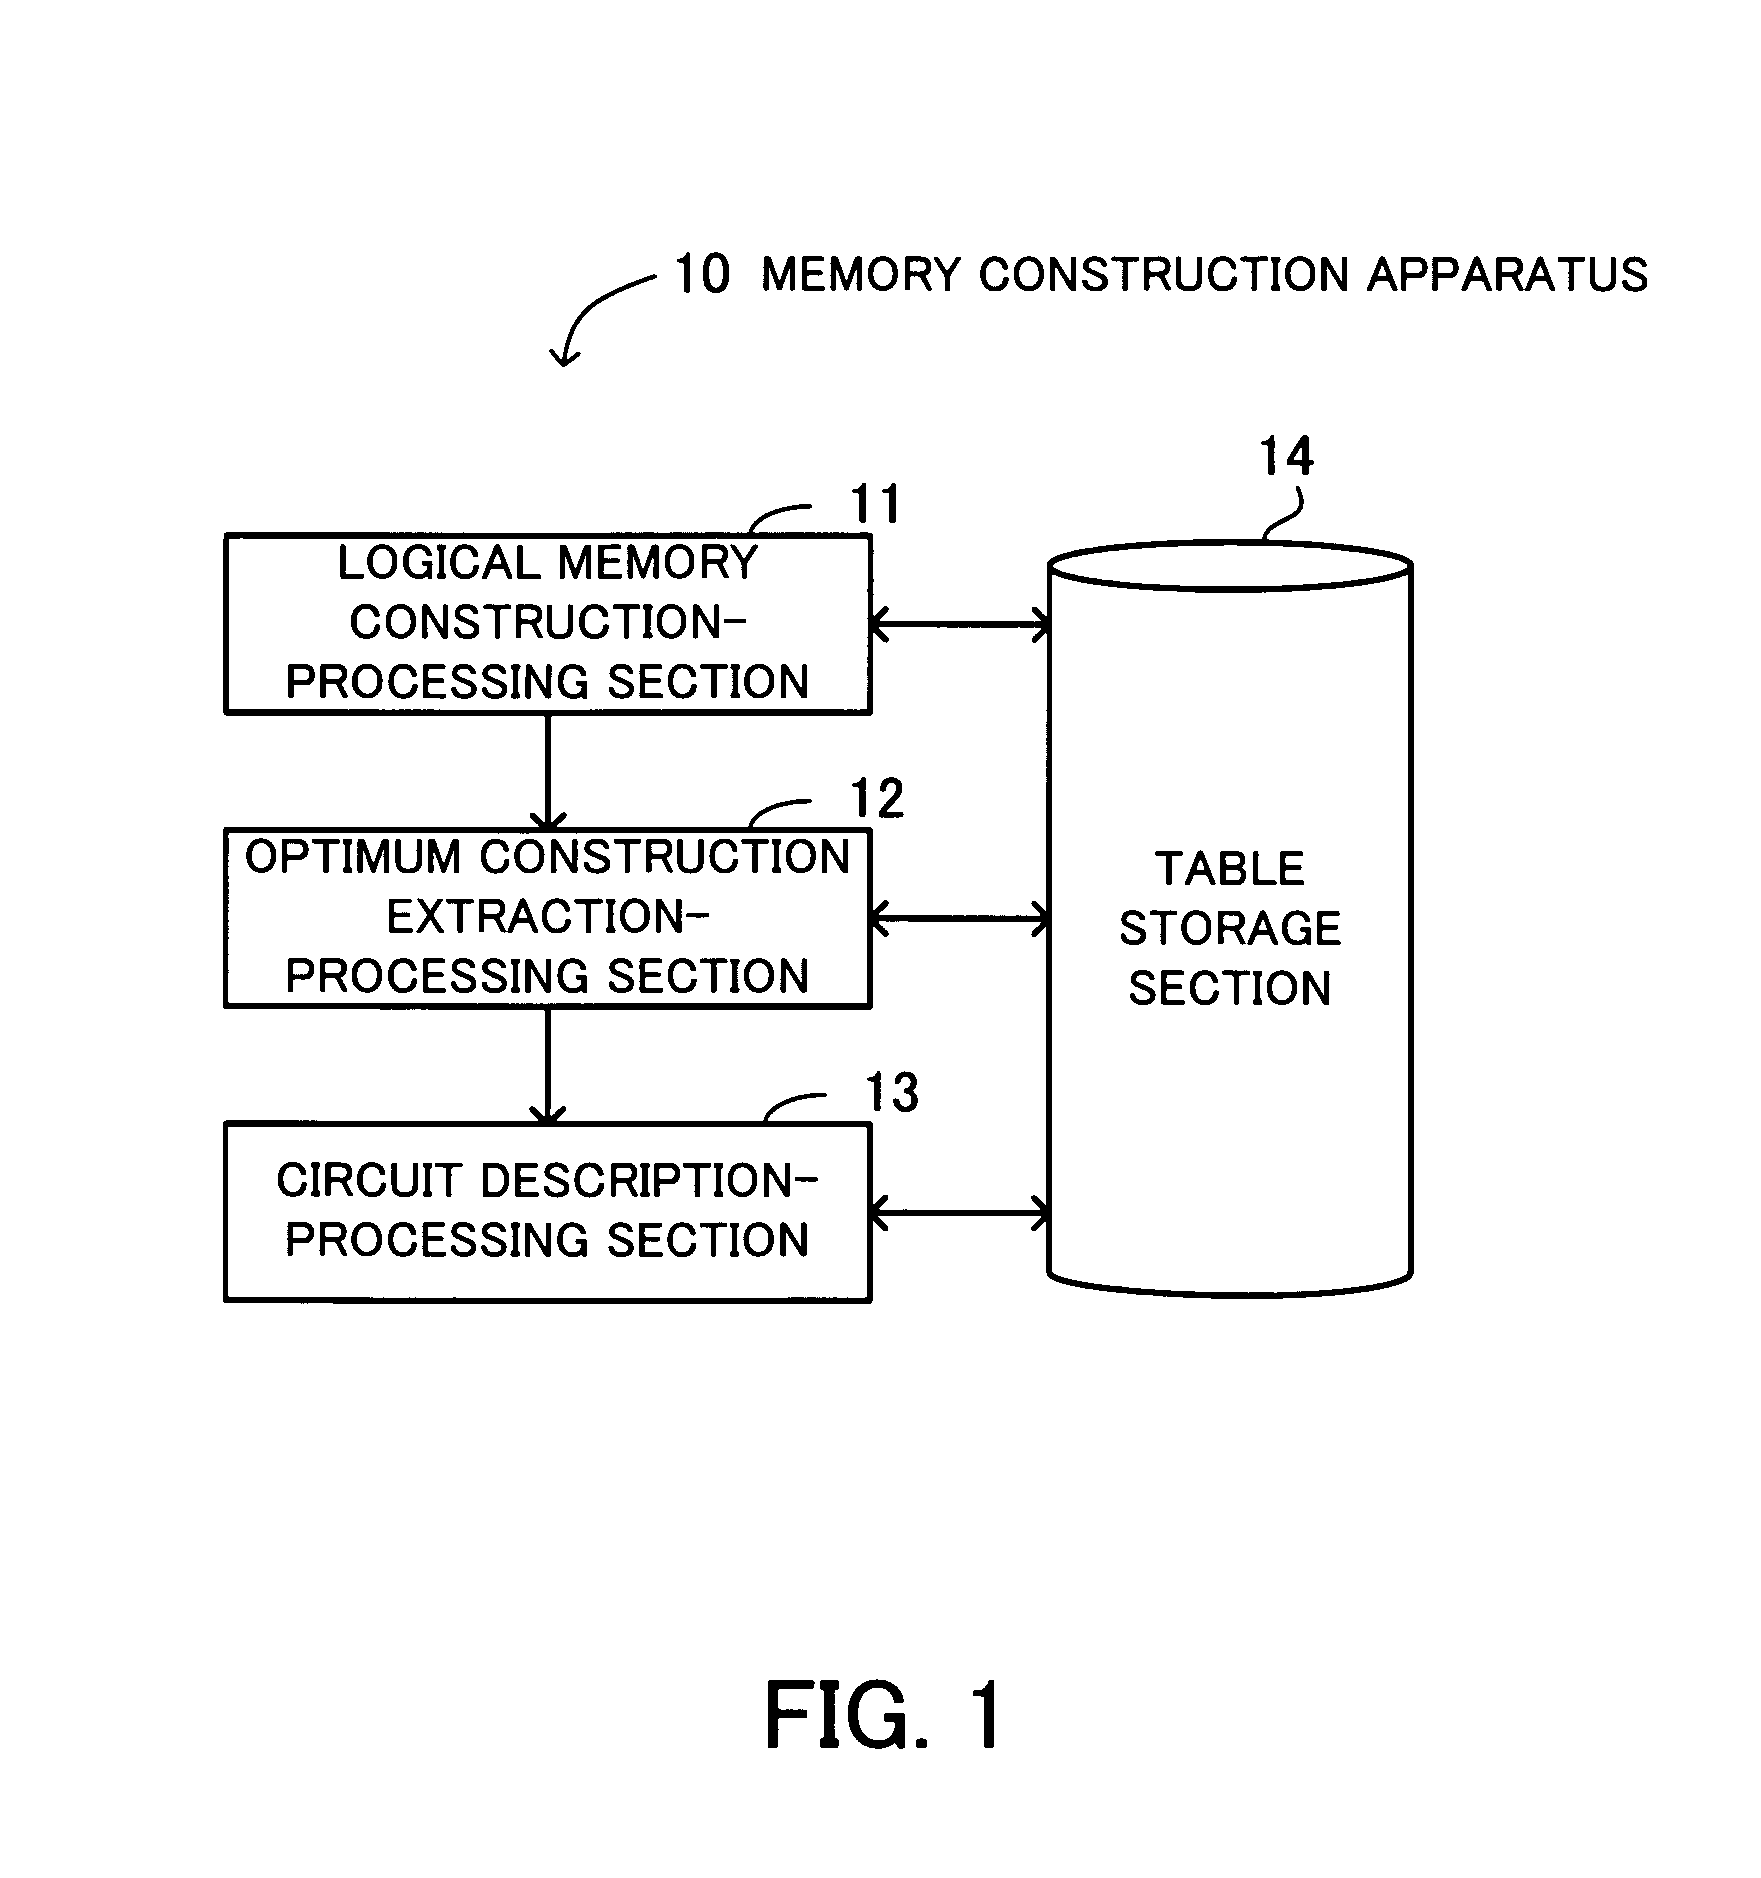 Memory construction apparatus for forming logical memory space